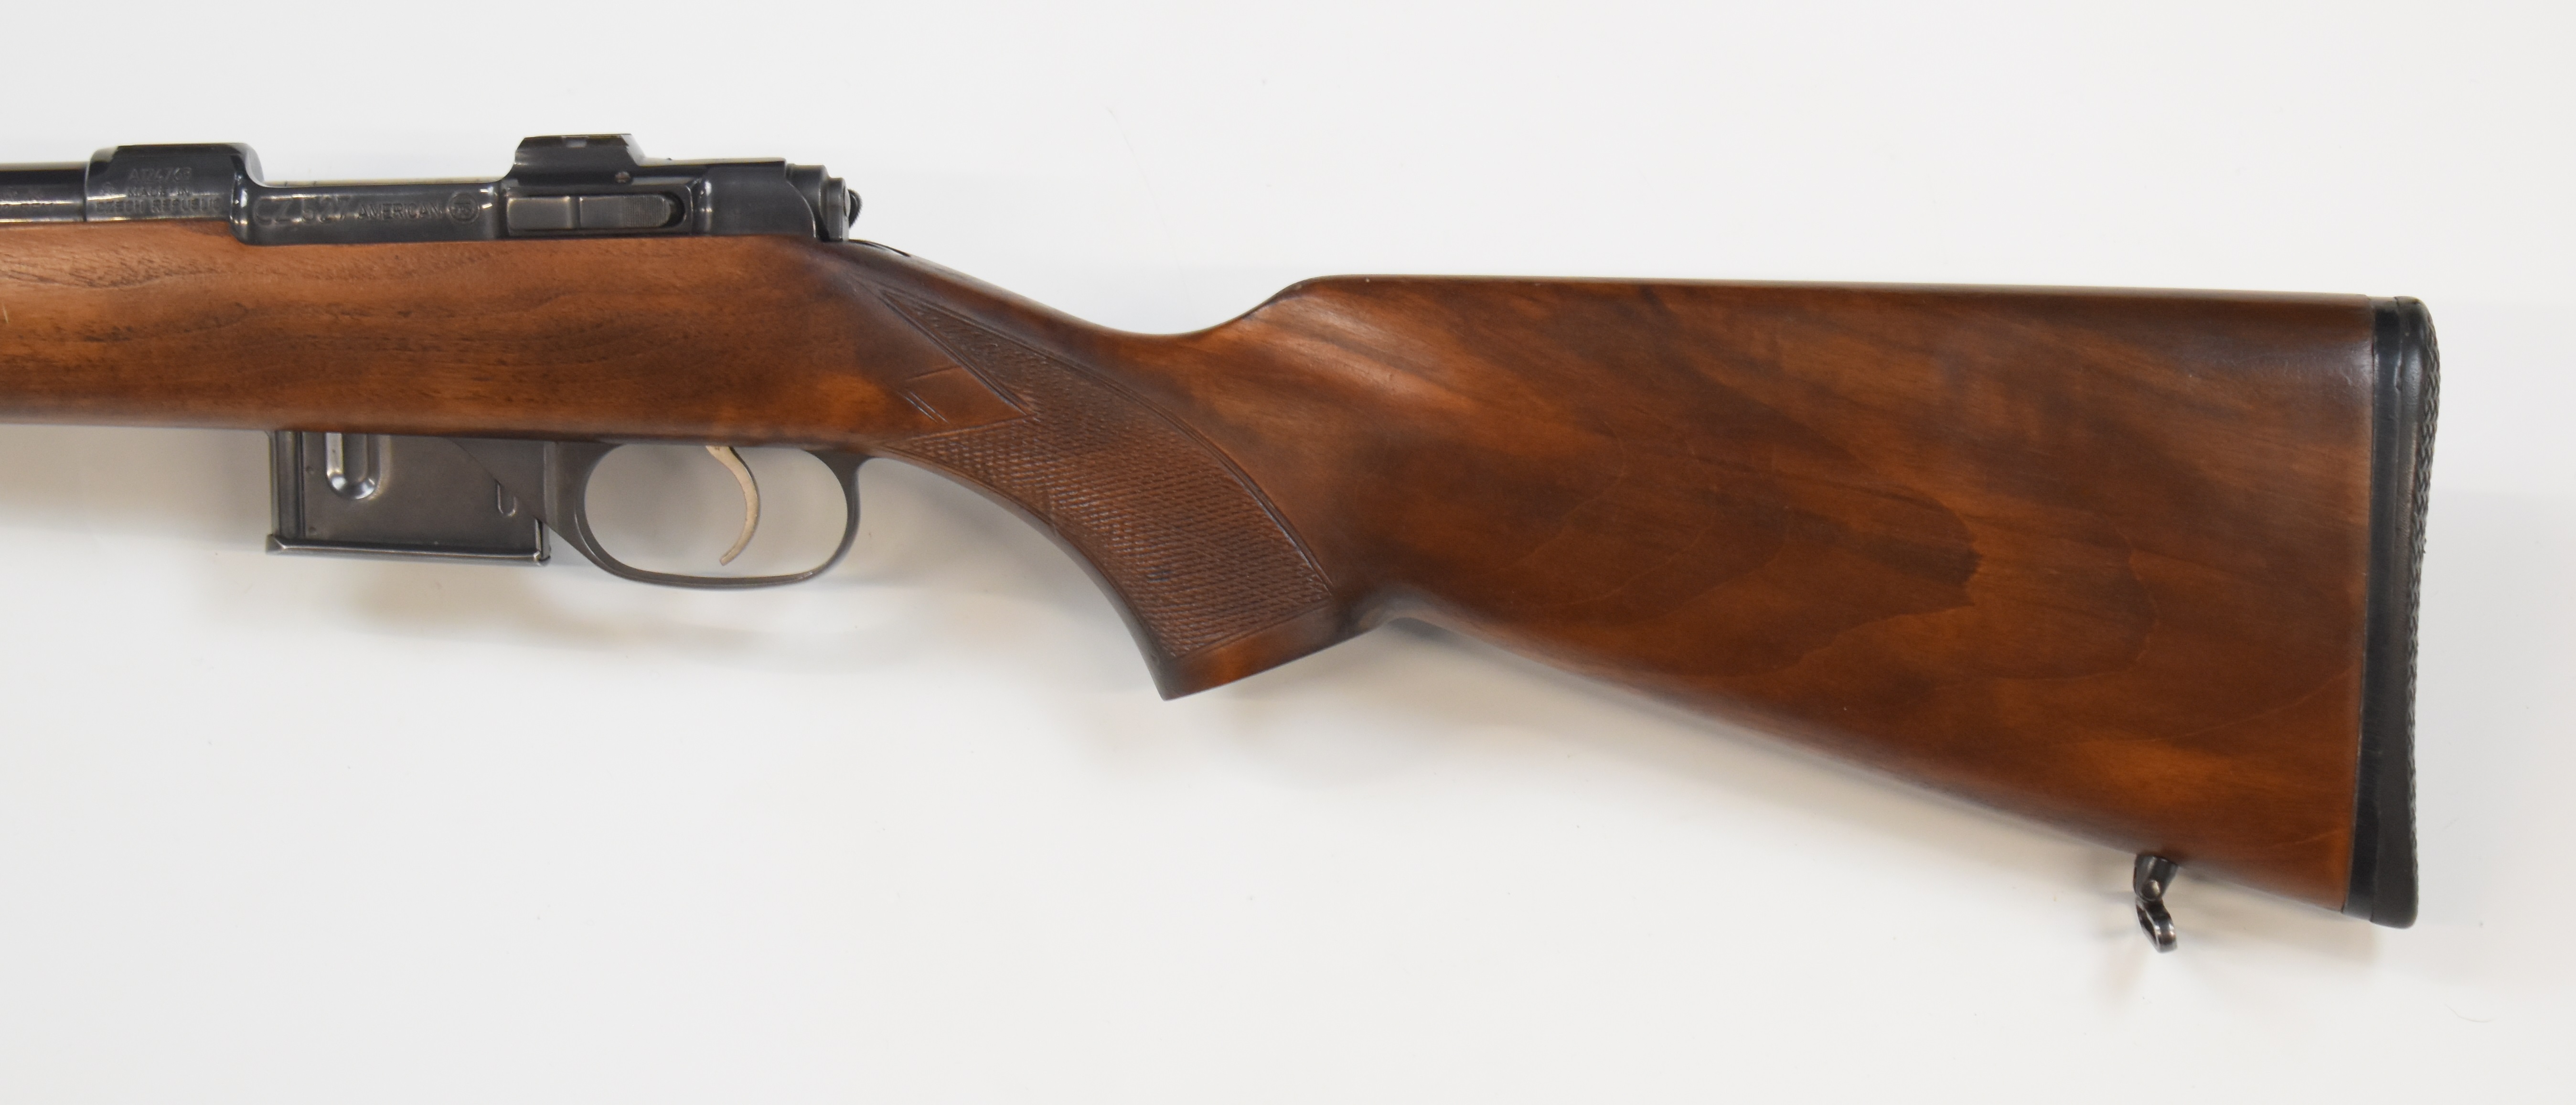 CZ 527 American .222 Remington bolt-action rifle with chequered semi-pistol grip and forend, sling - Image 7 of 10